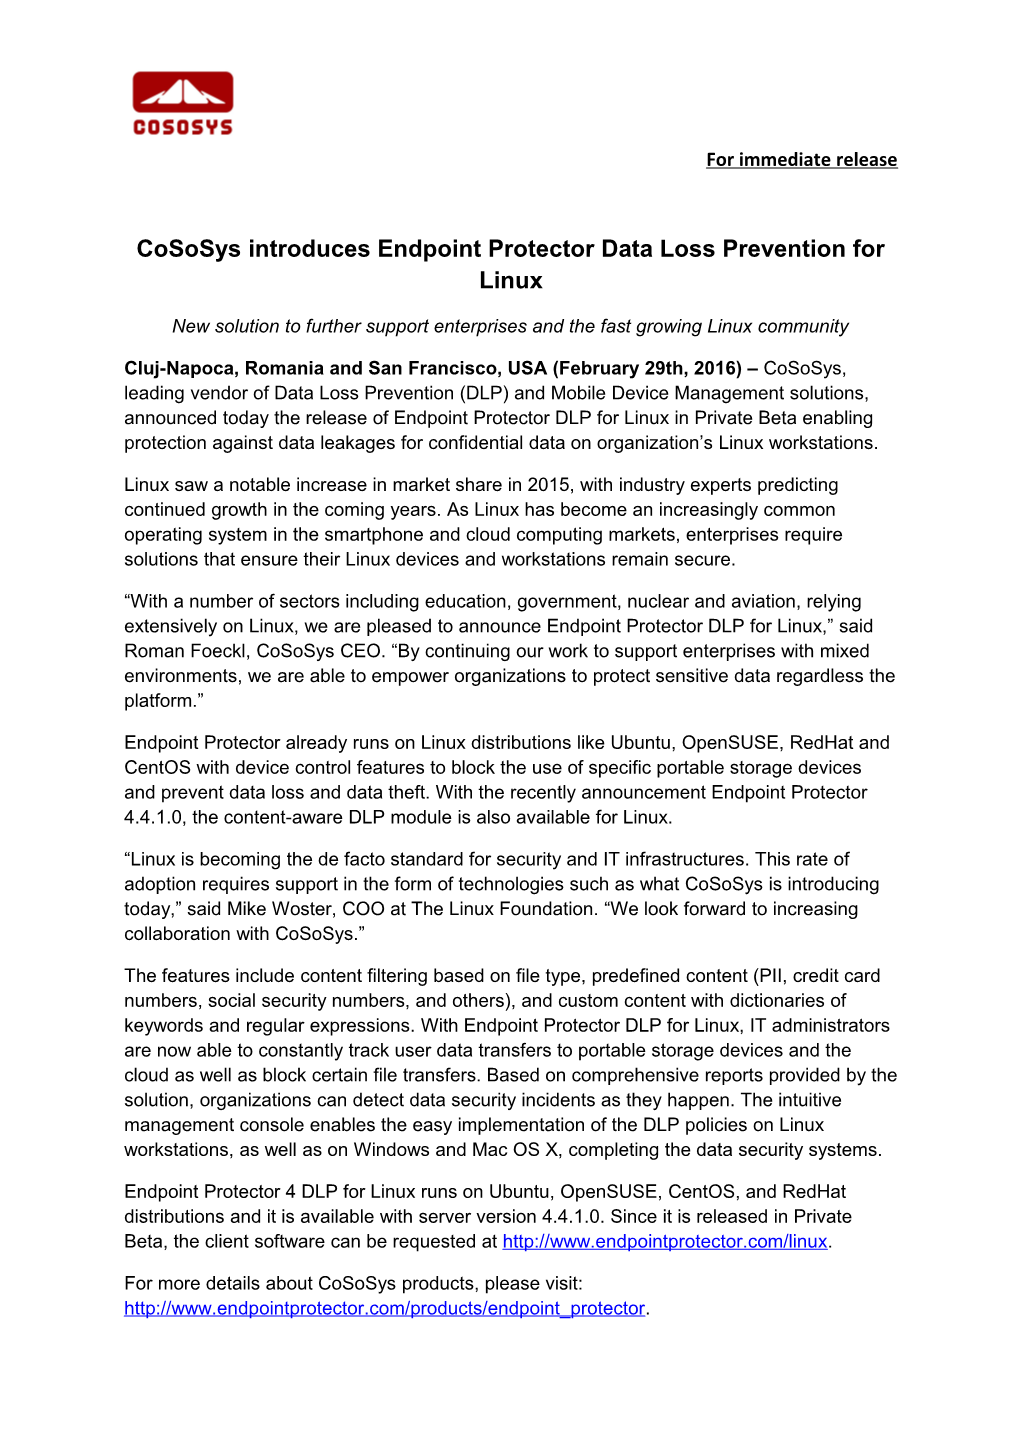 Cososysintroduces Endpoint Protector Data Loss Prevention for Linux